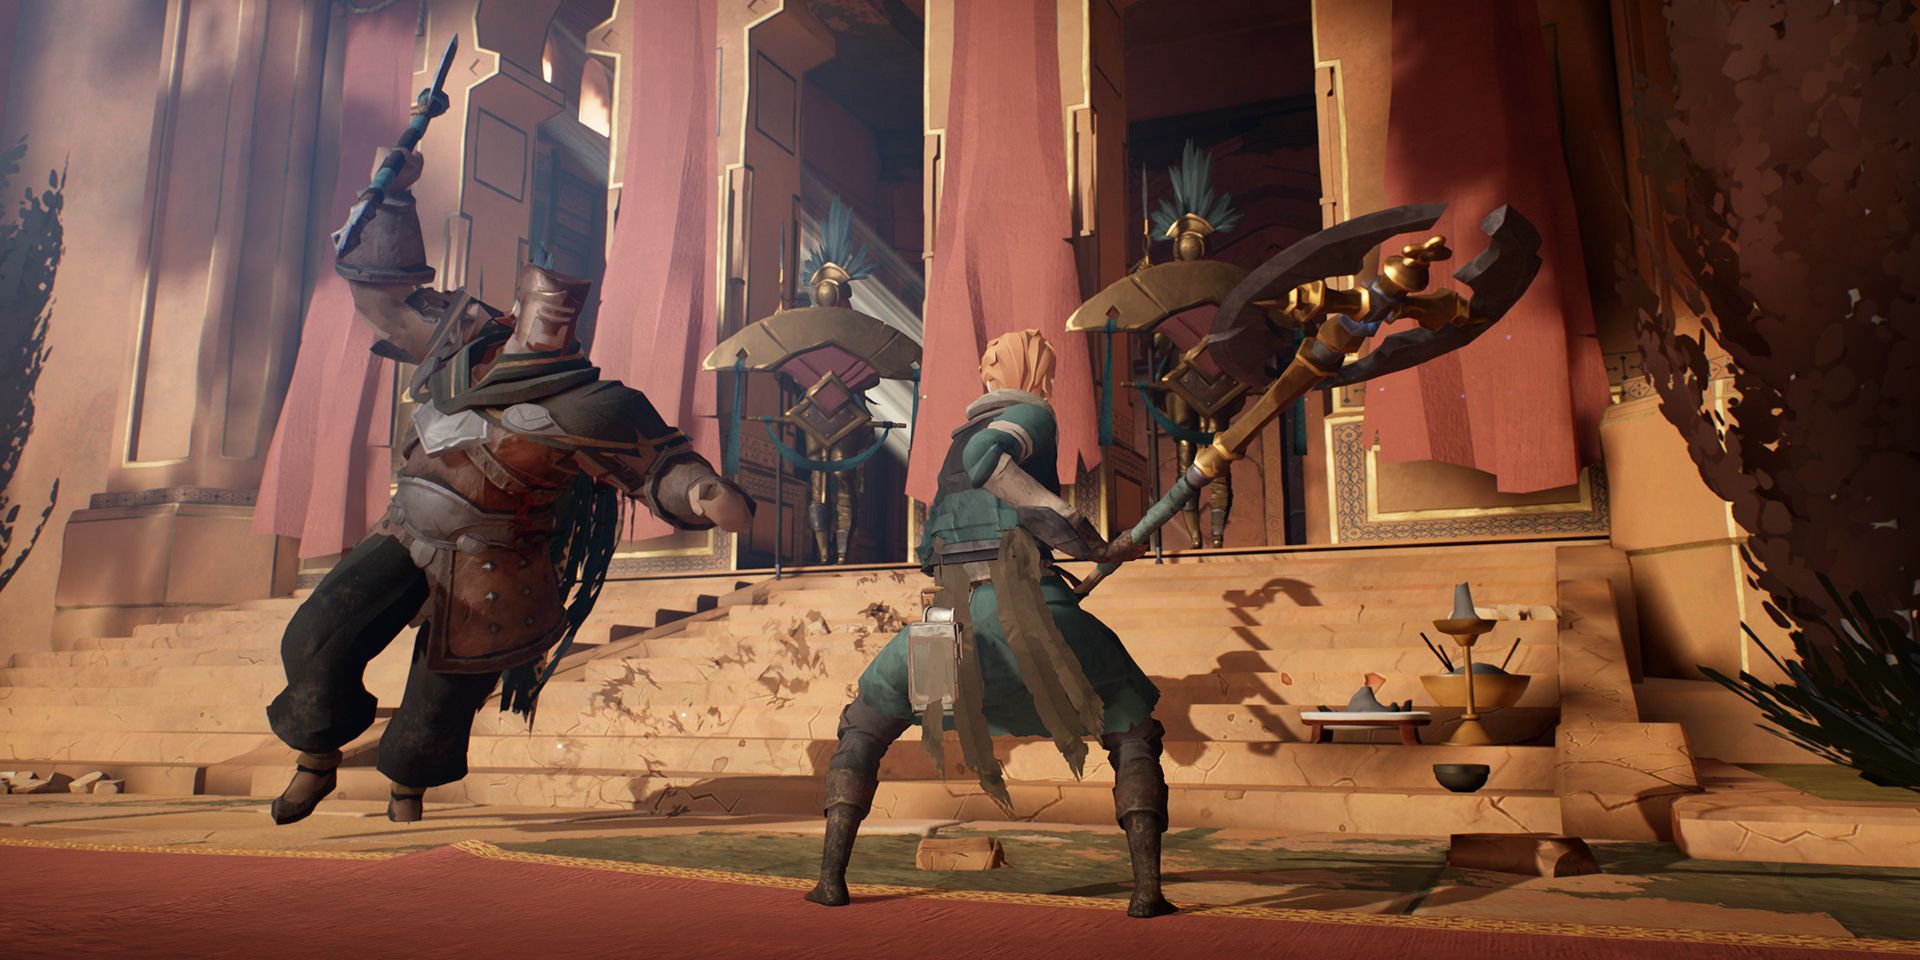 A promotional images for the 2019 indie video game Ashen.